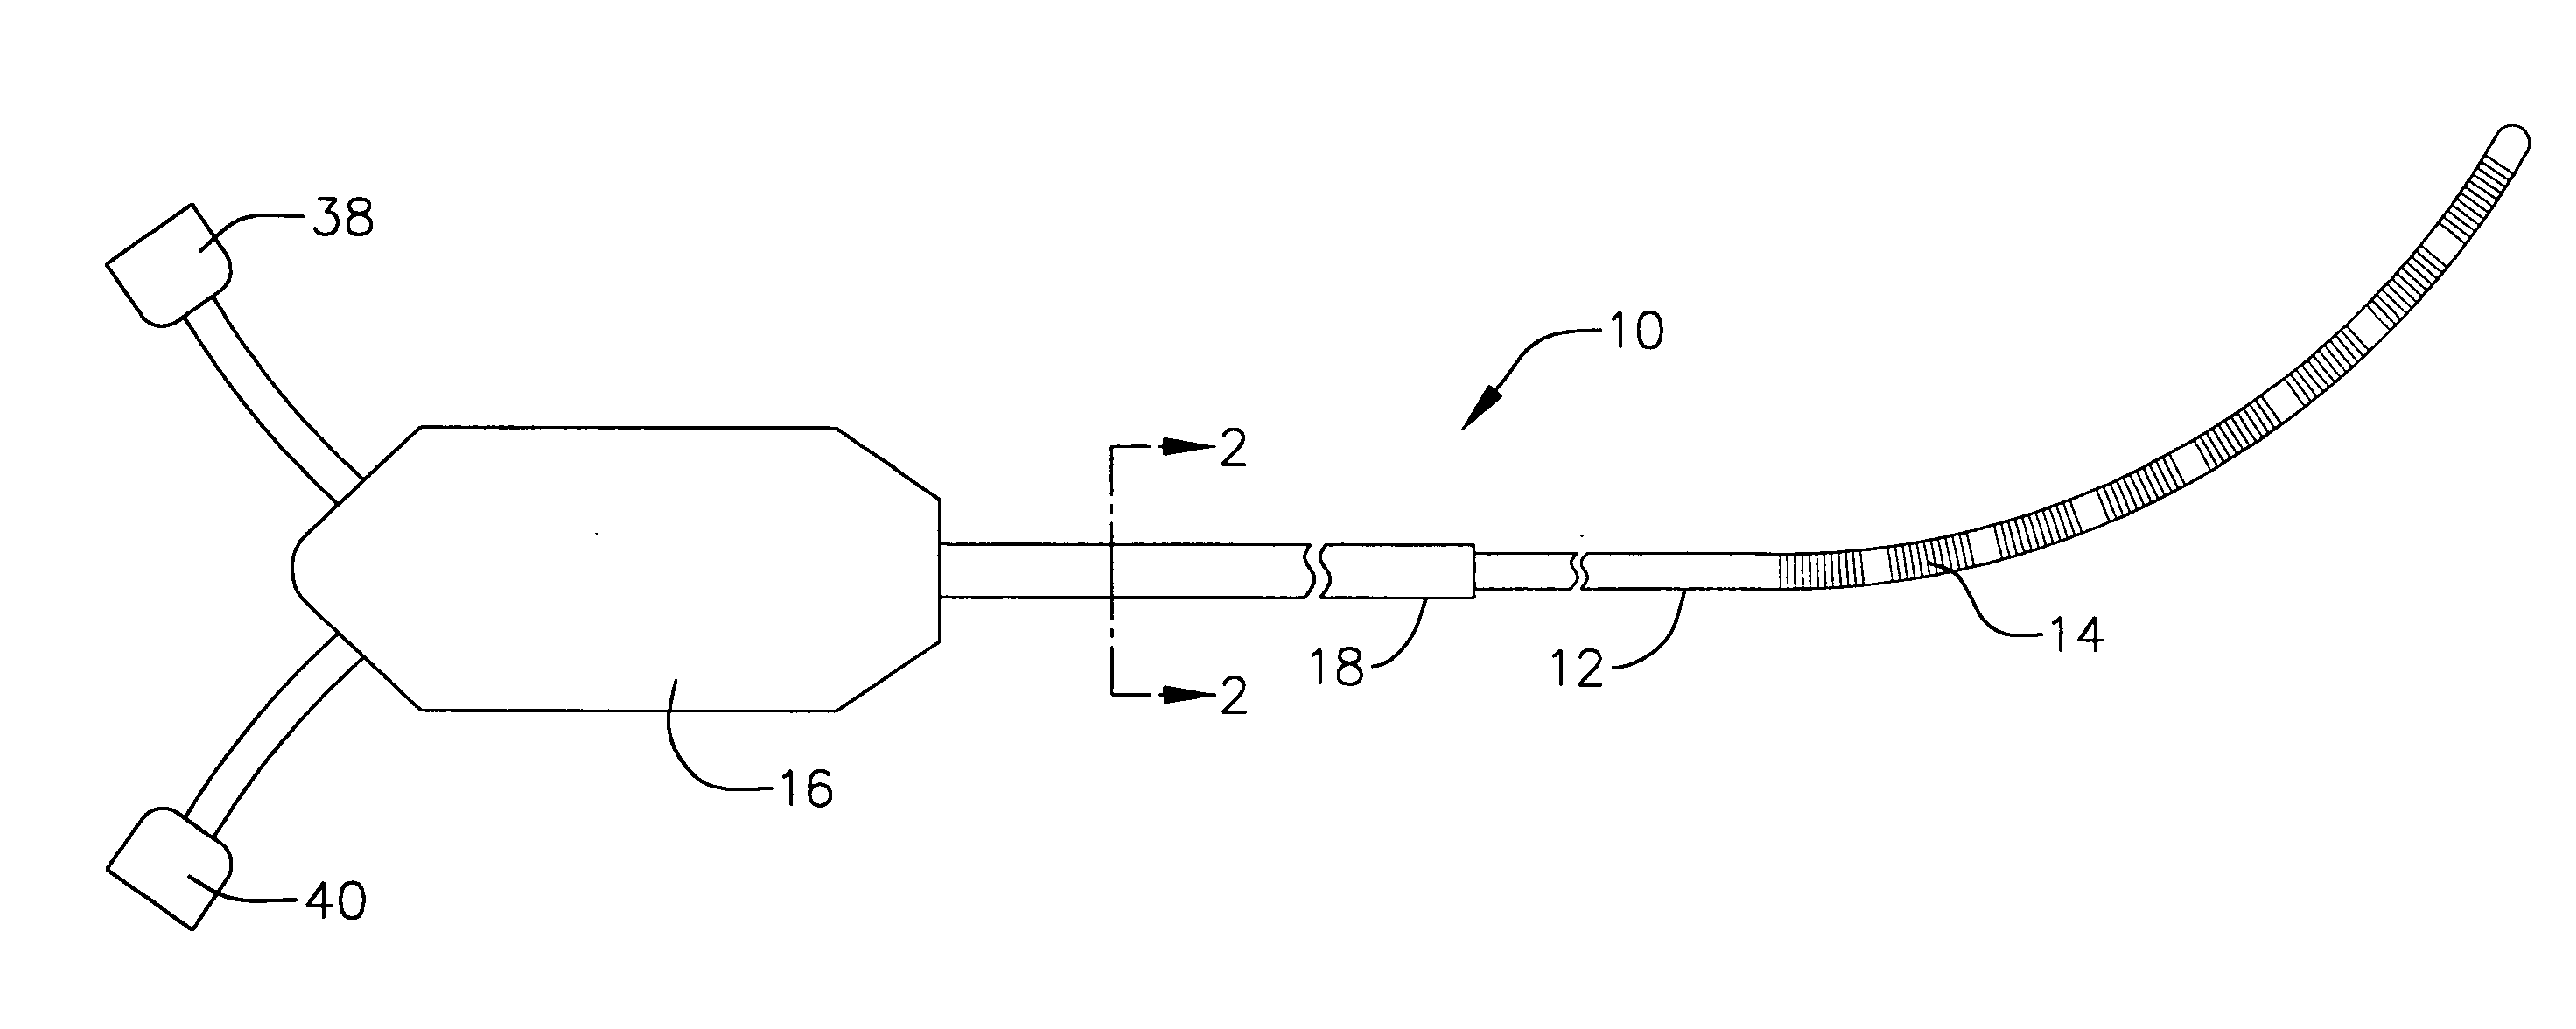 Internal indifferent electrode device for use with lesion creation apparatus and method of forming lesions using the same